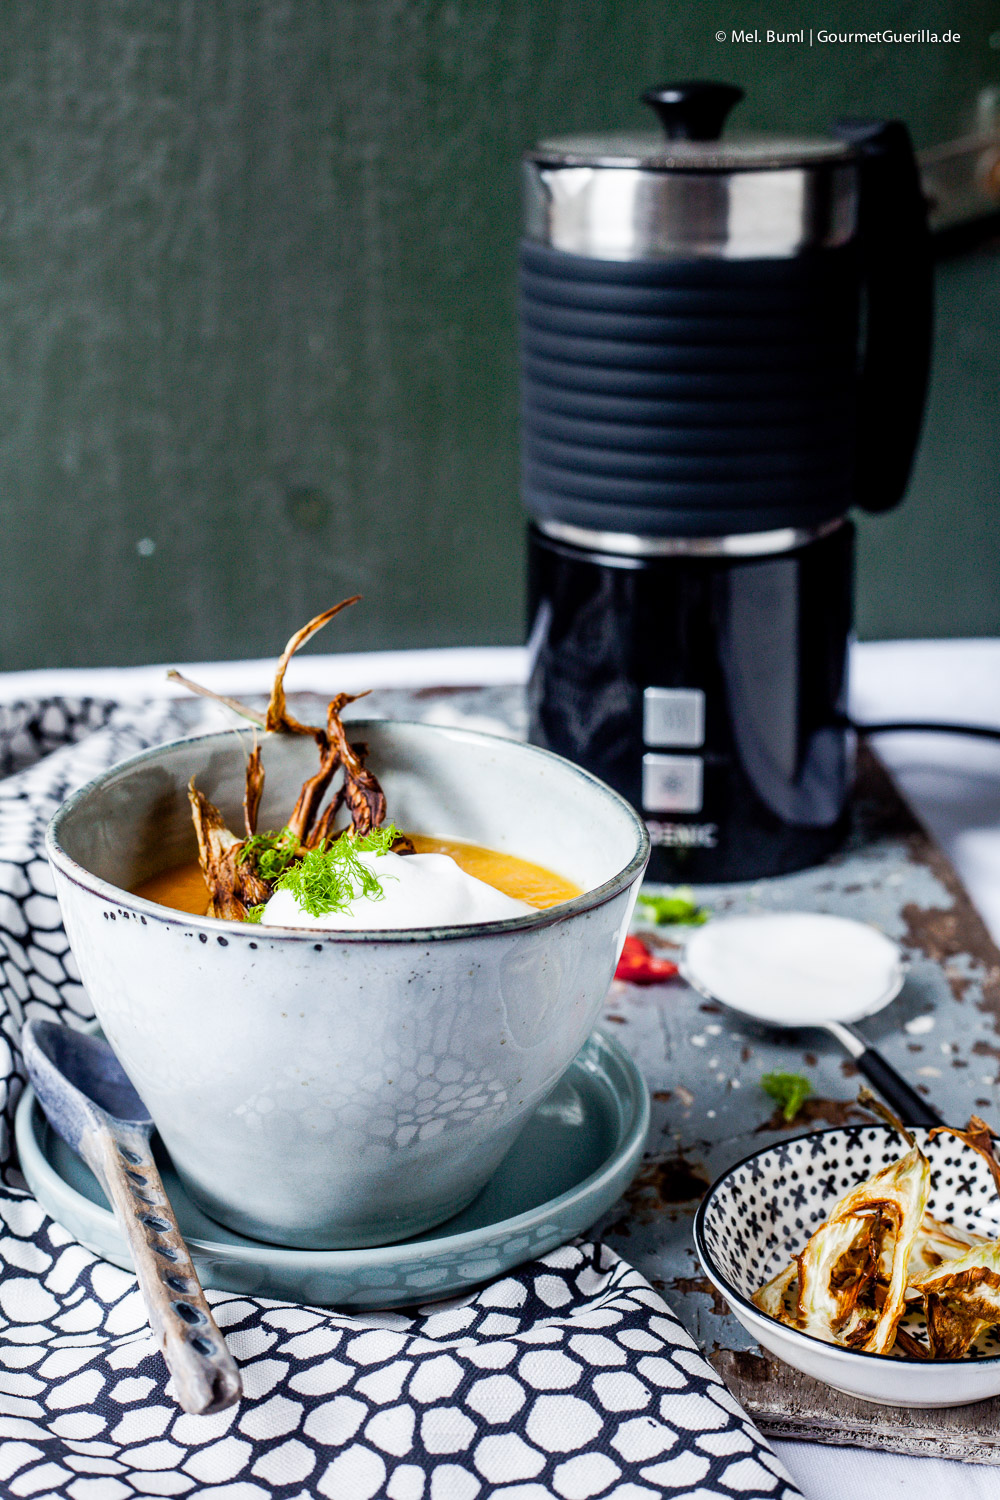  Melon and carrot soup with chili foam and crunchy fennel | GourmetGuerilla.de 